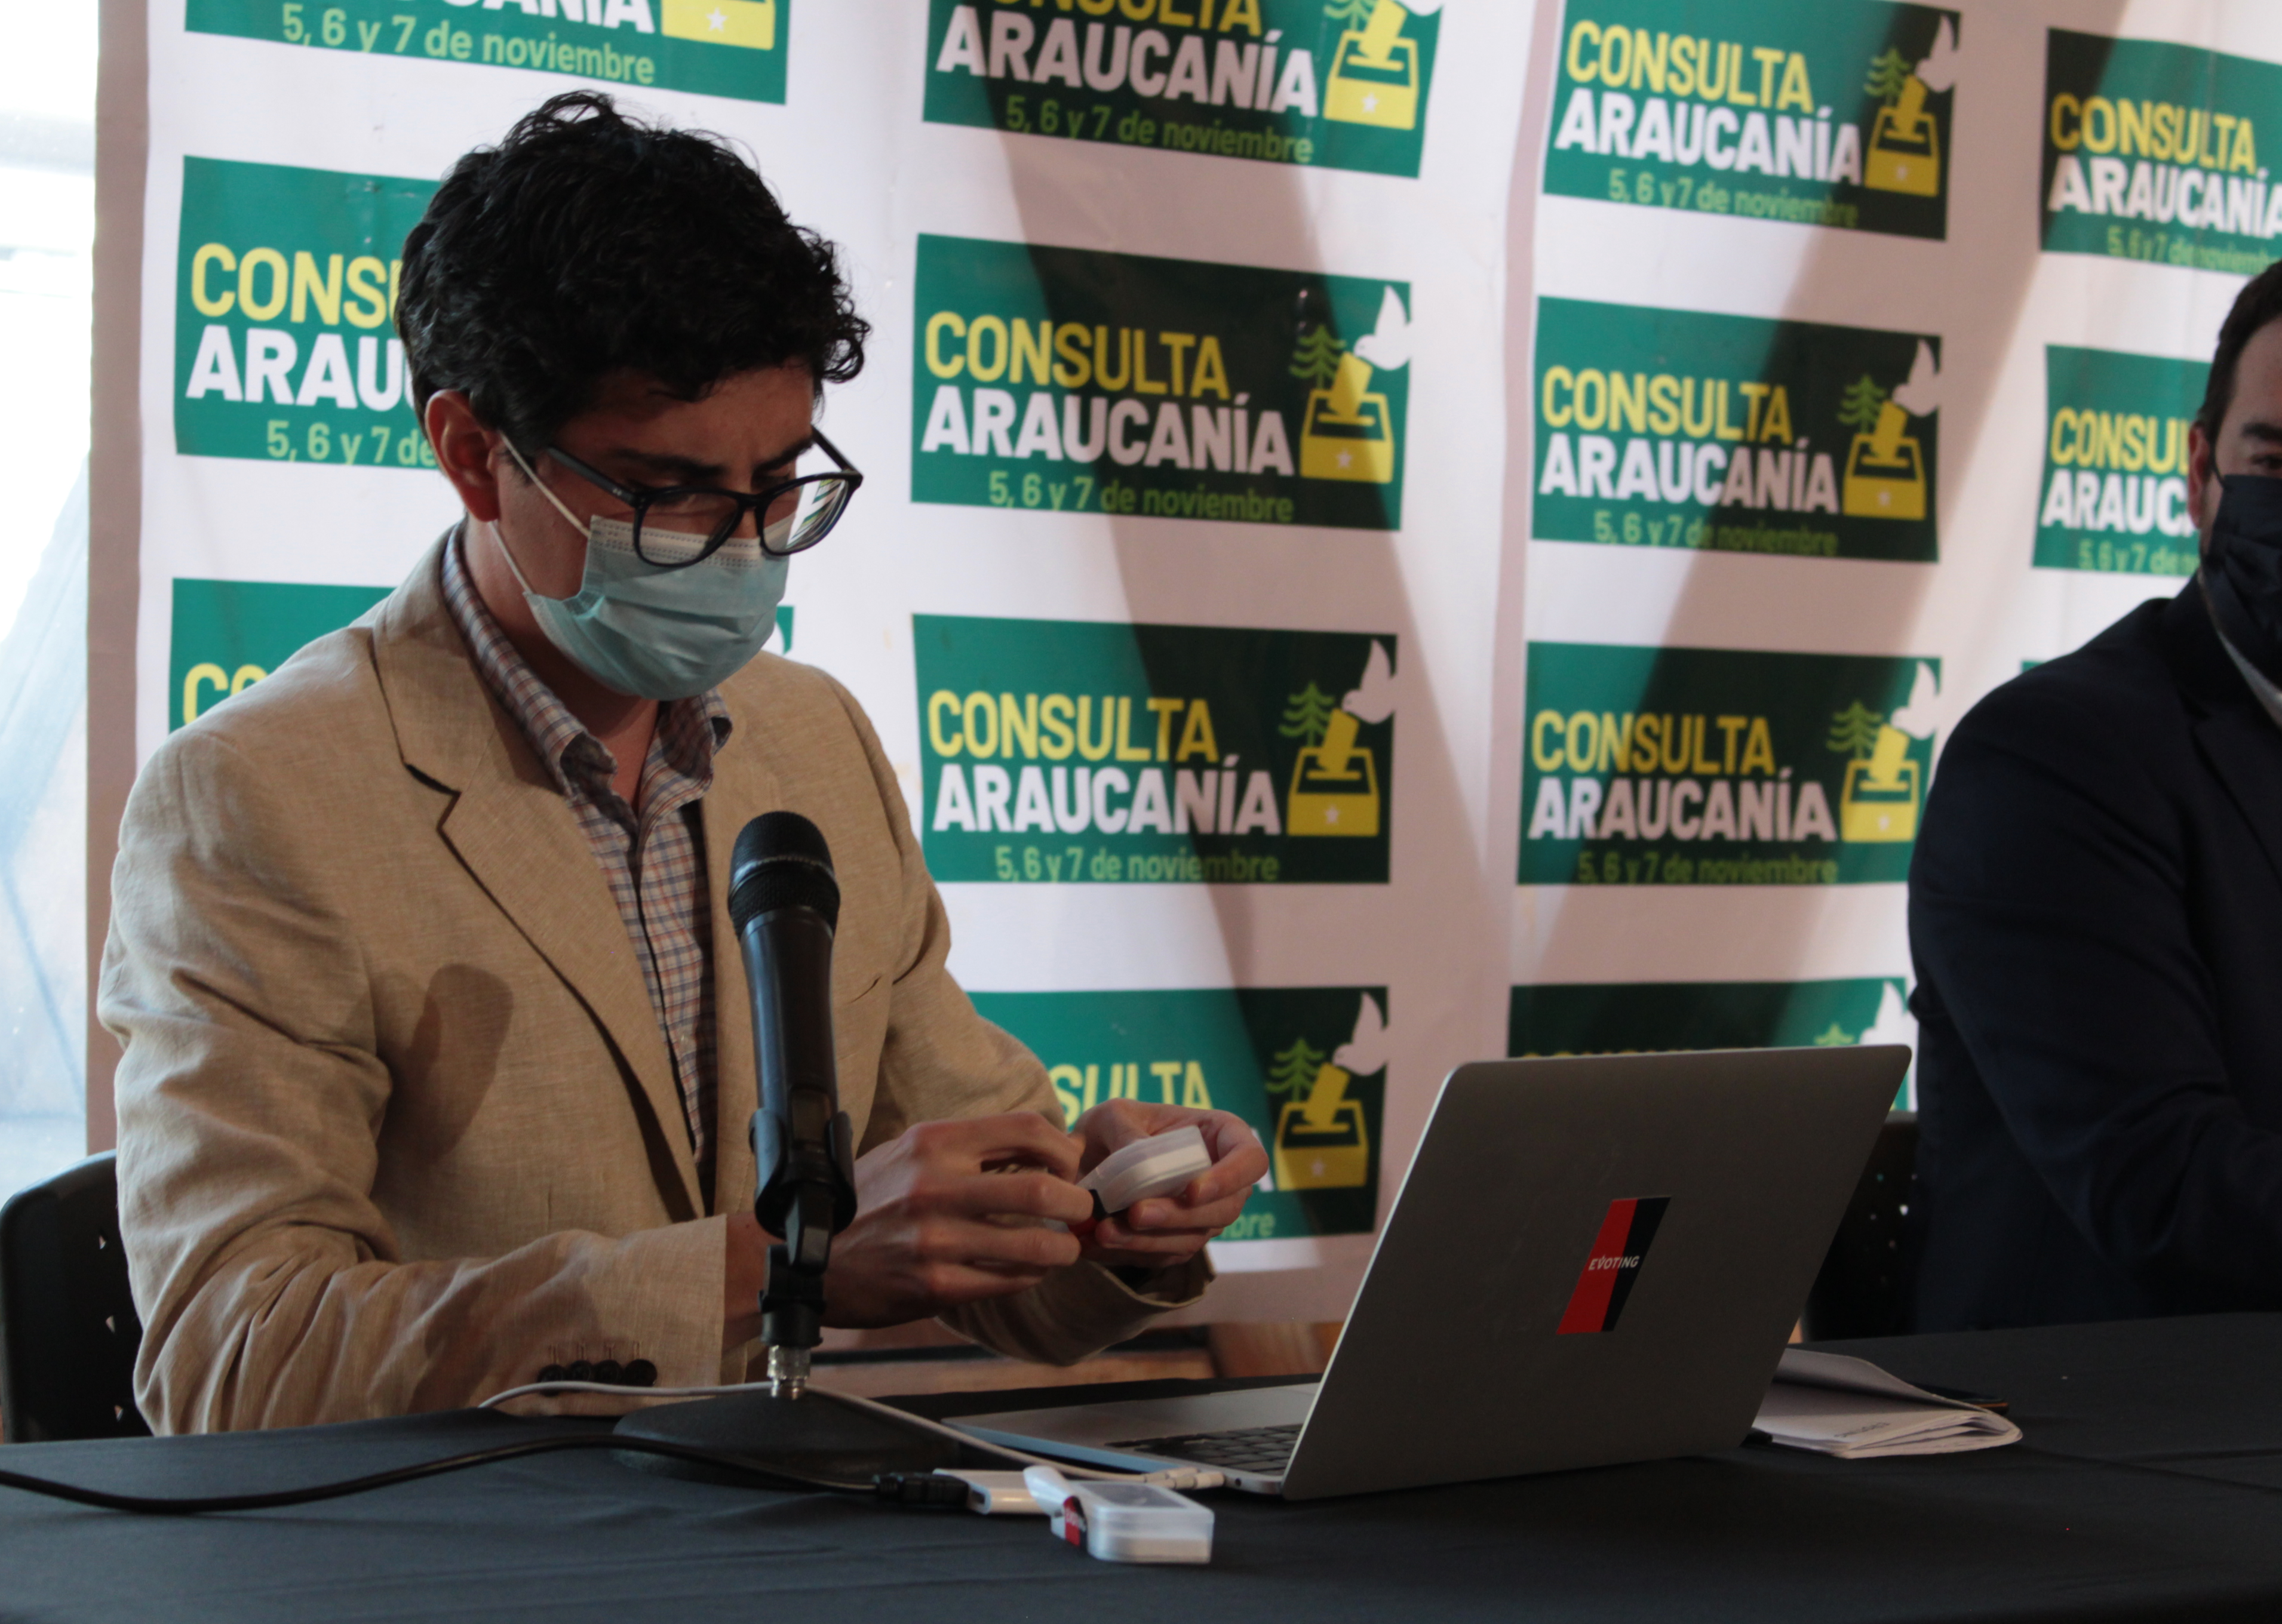 Felipe Lorca, Operations Manager of EVoting, in a vote counting ceremony at the Consultation in La Araucanía